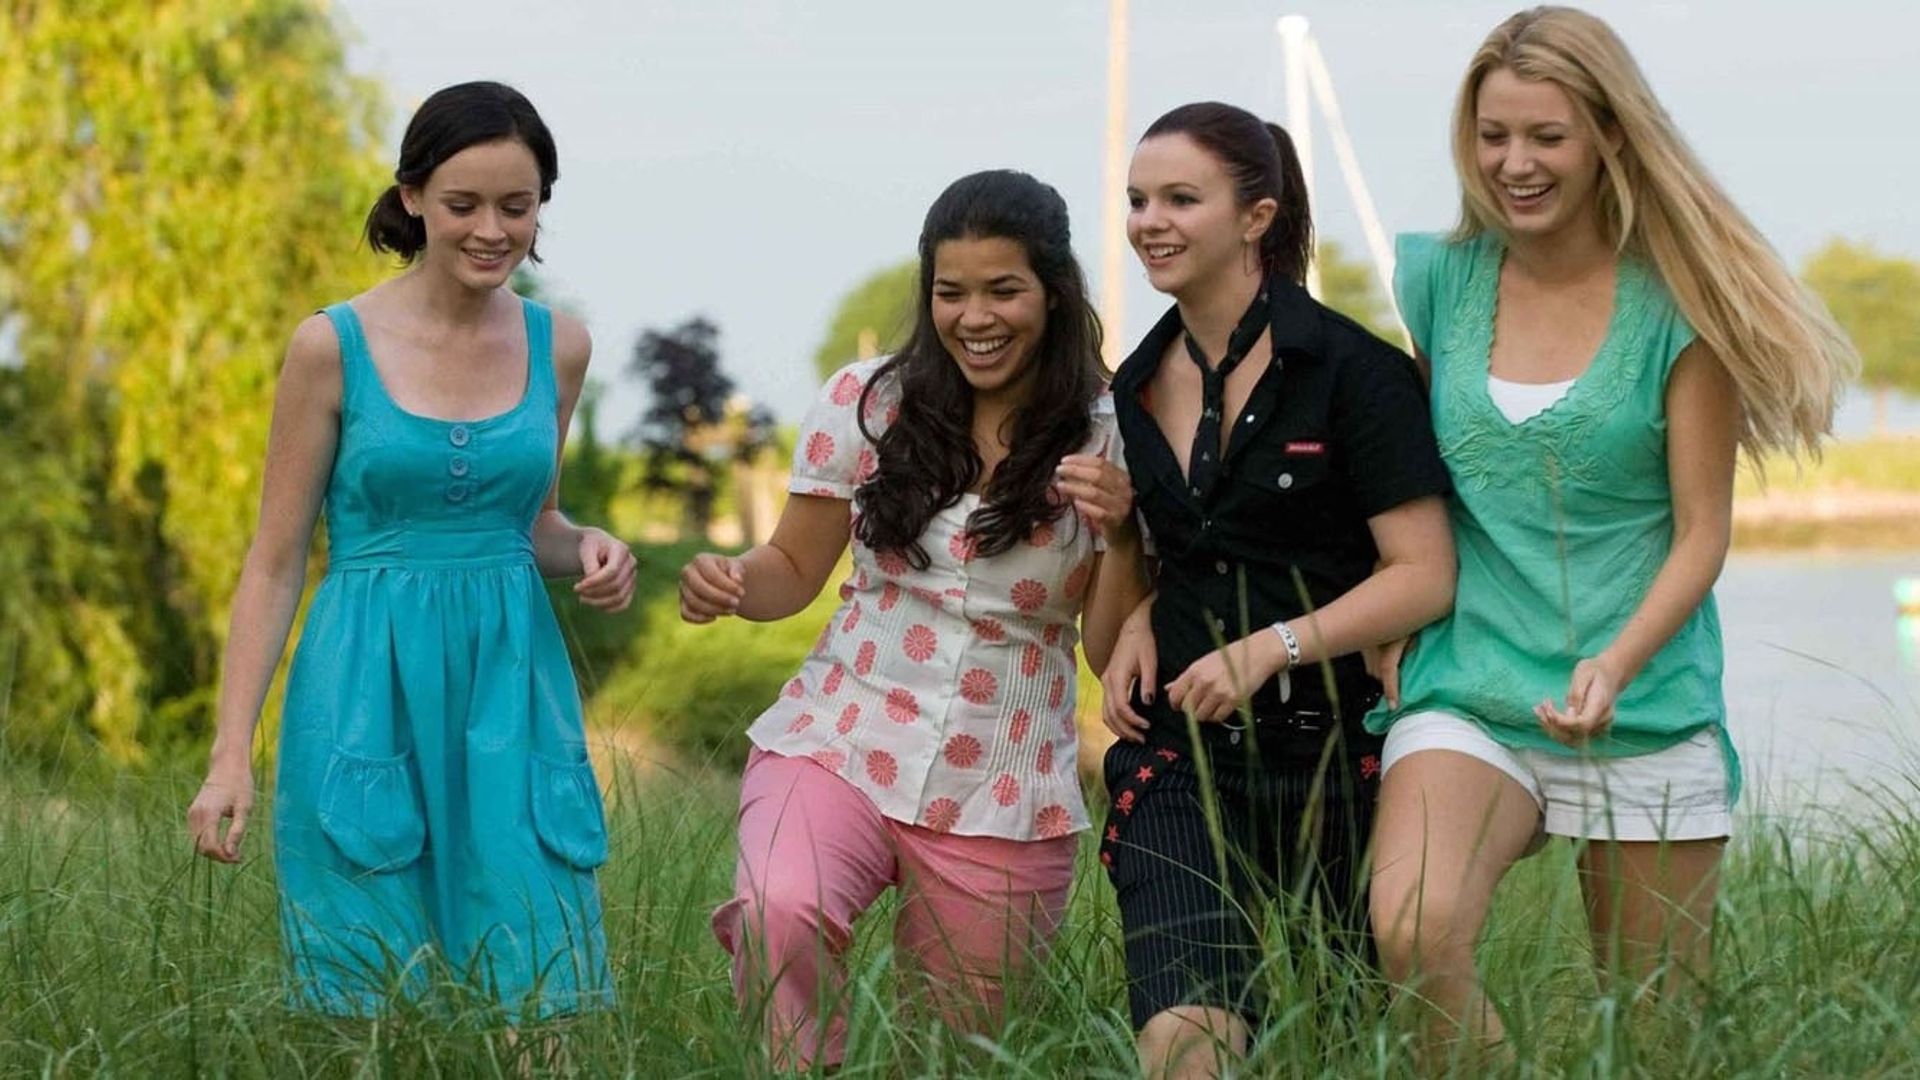 The Sisterhood of the Traveling Pants 2 background